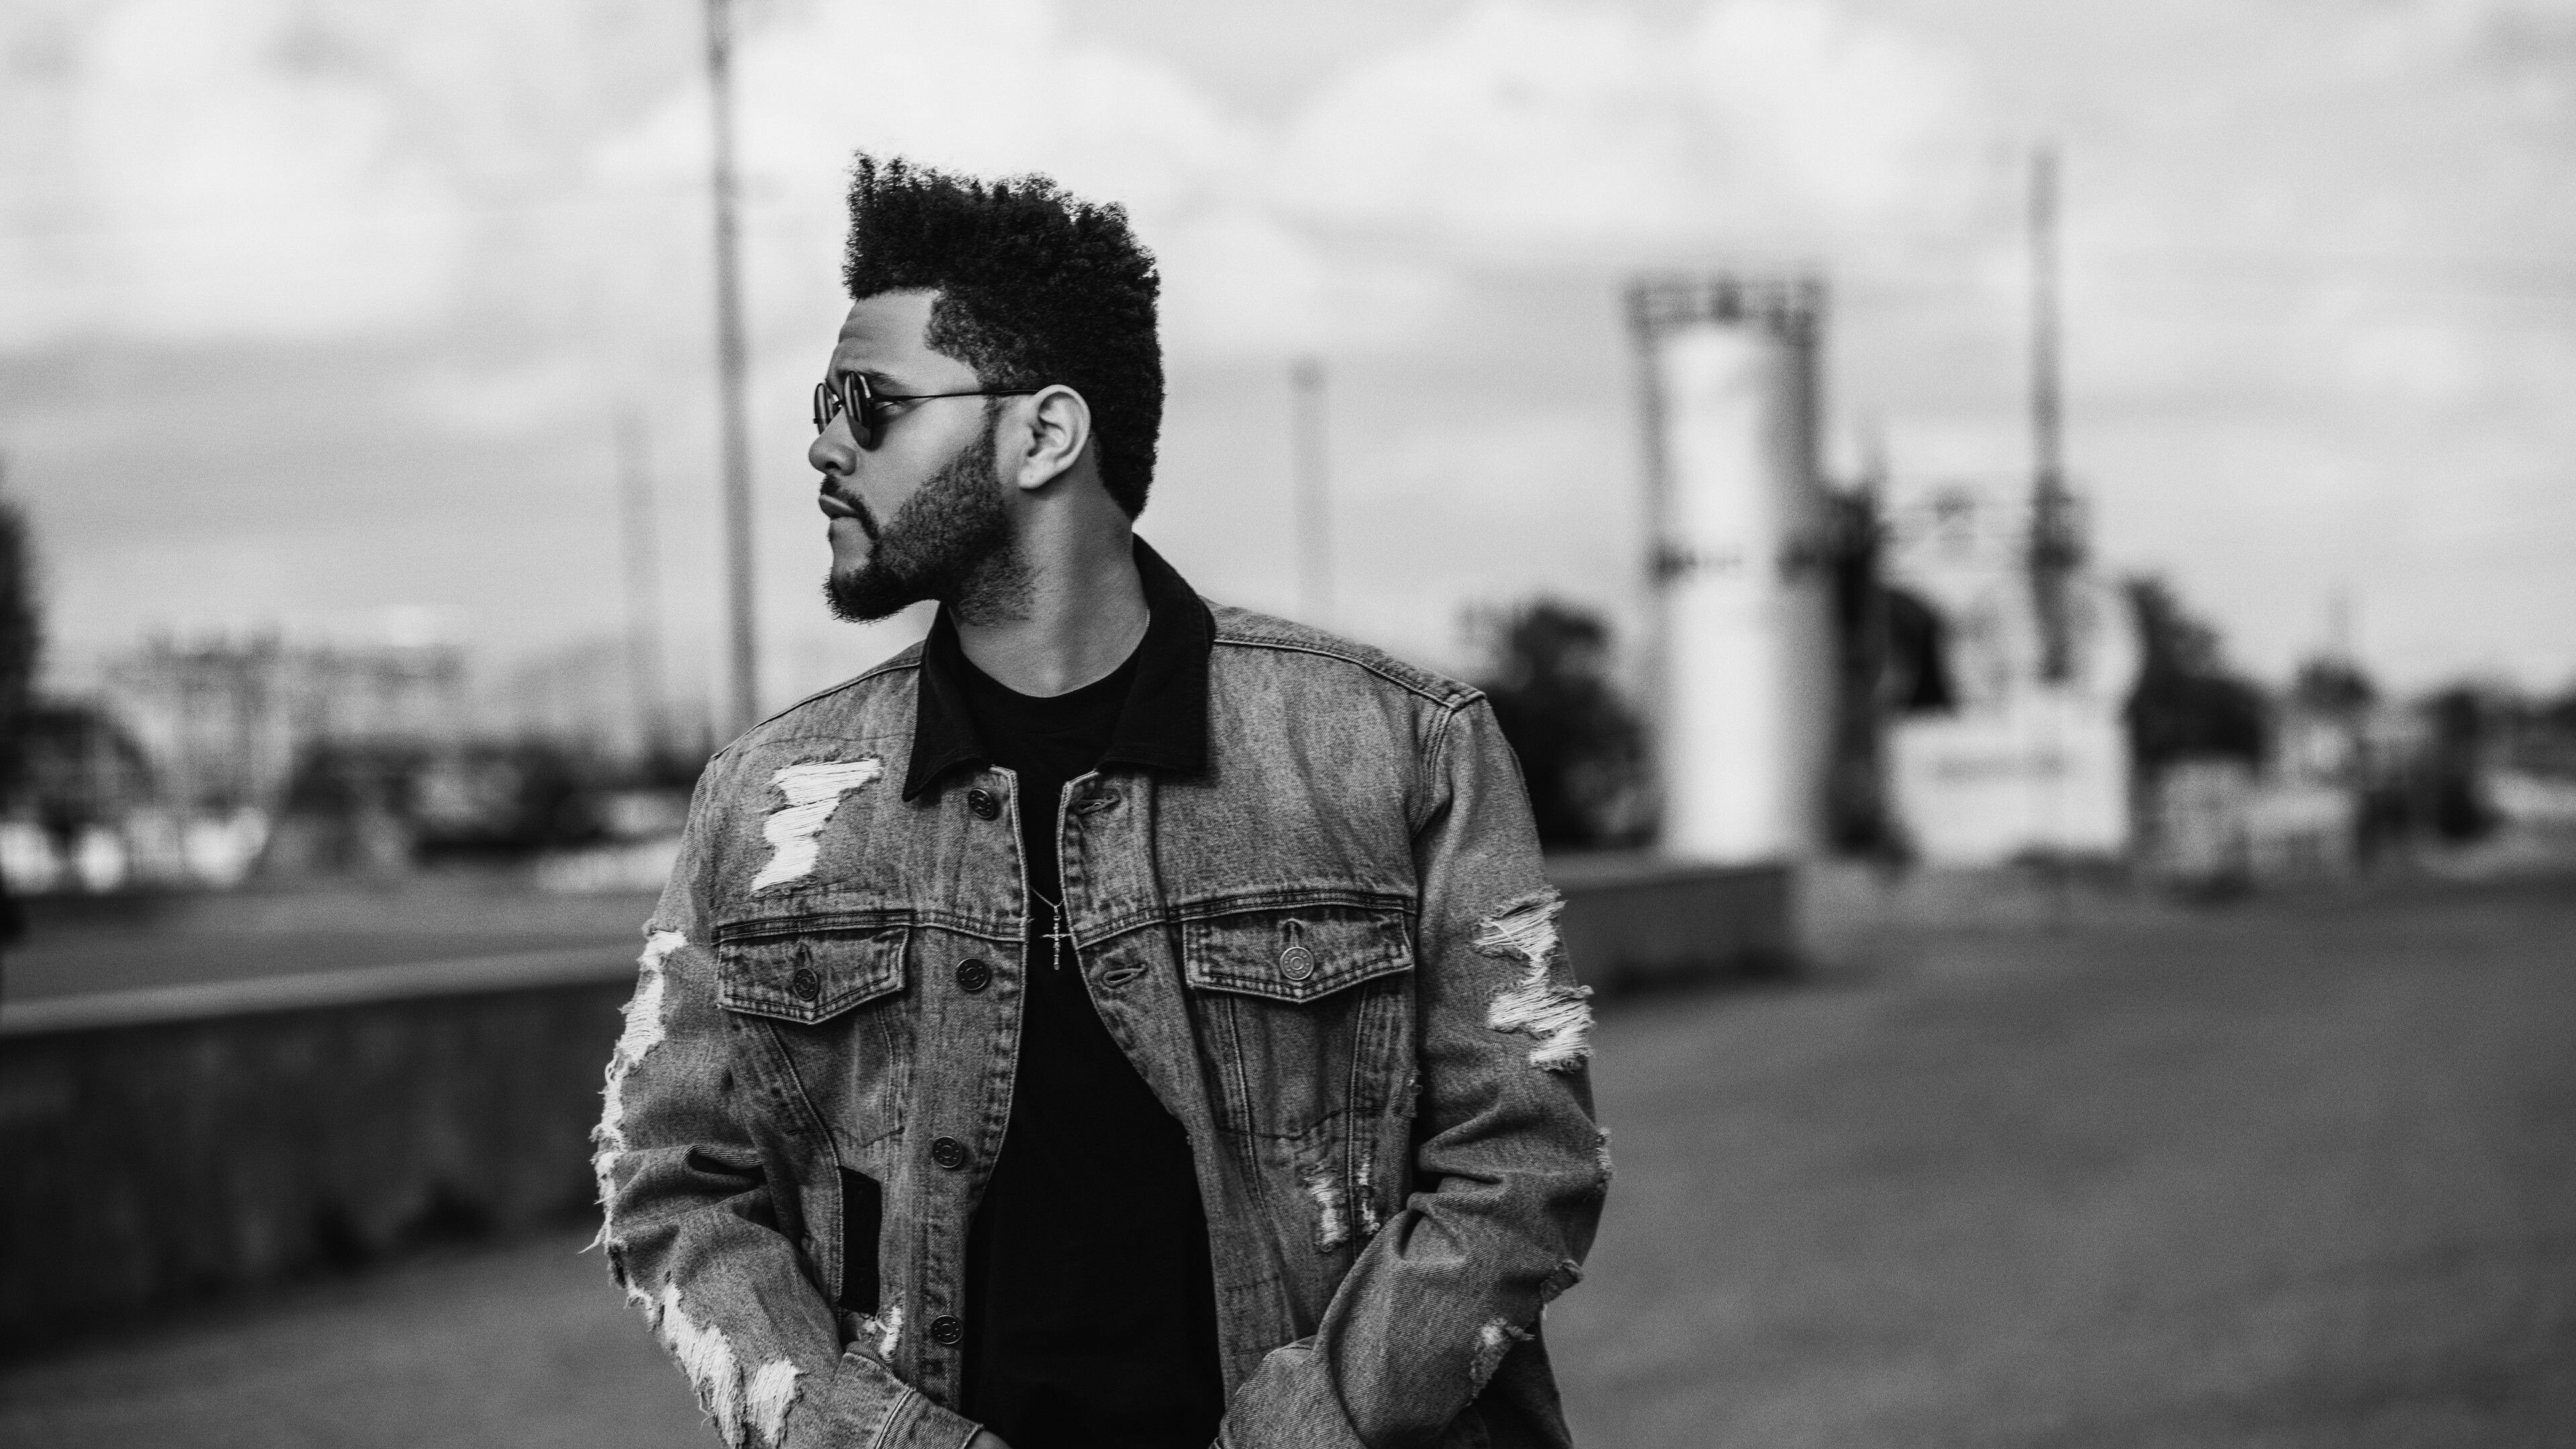 The Weeknd: Tesfaye began his career in 2009 by anonymously releasing music on YouTube, Monochrome. 3840x2160 4K Wallpaper.